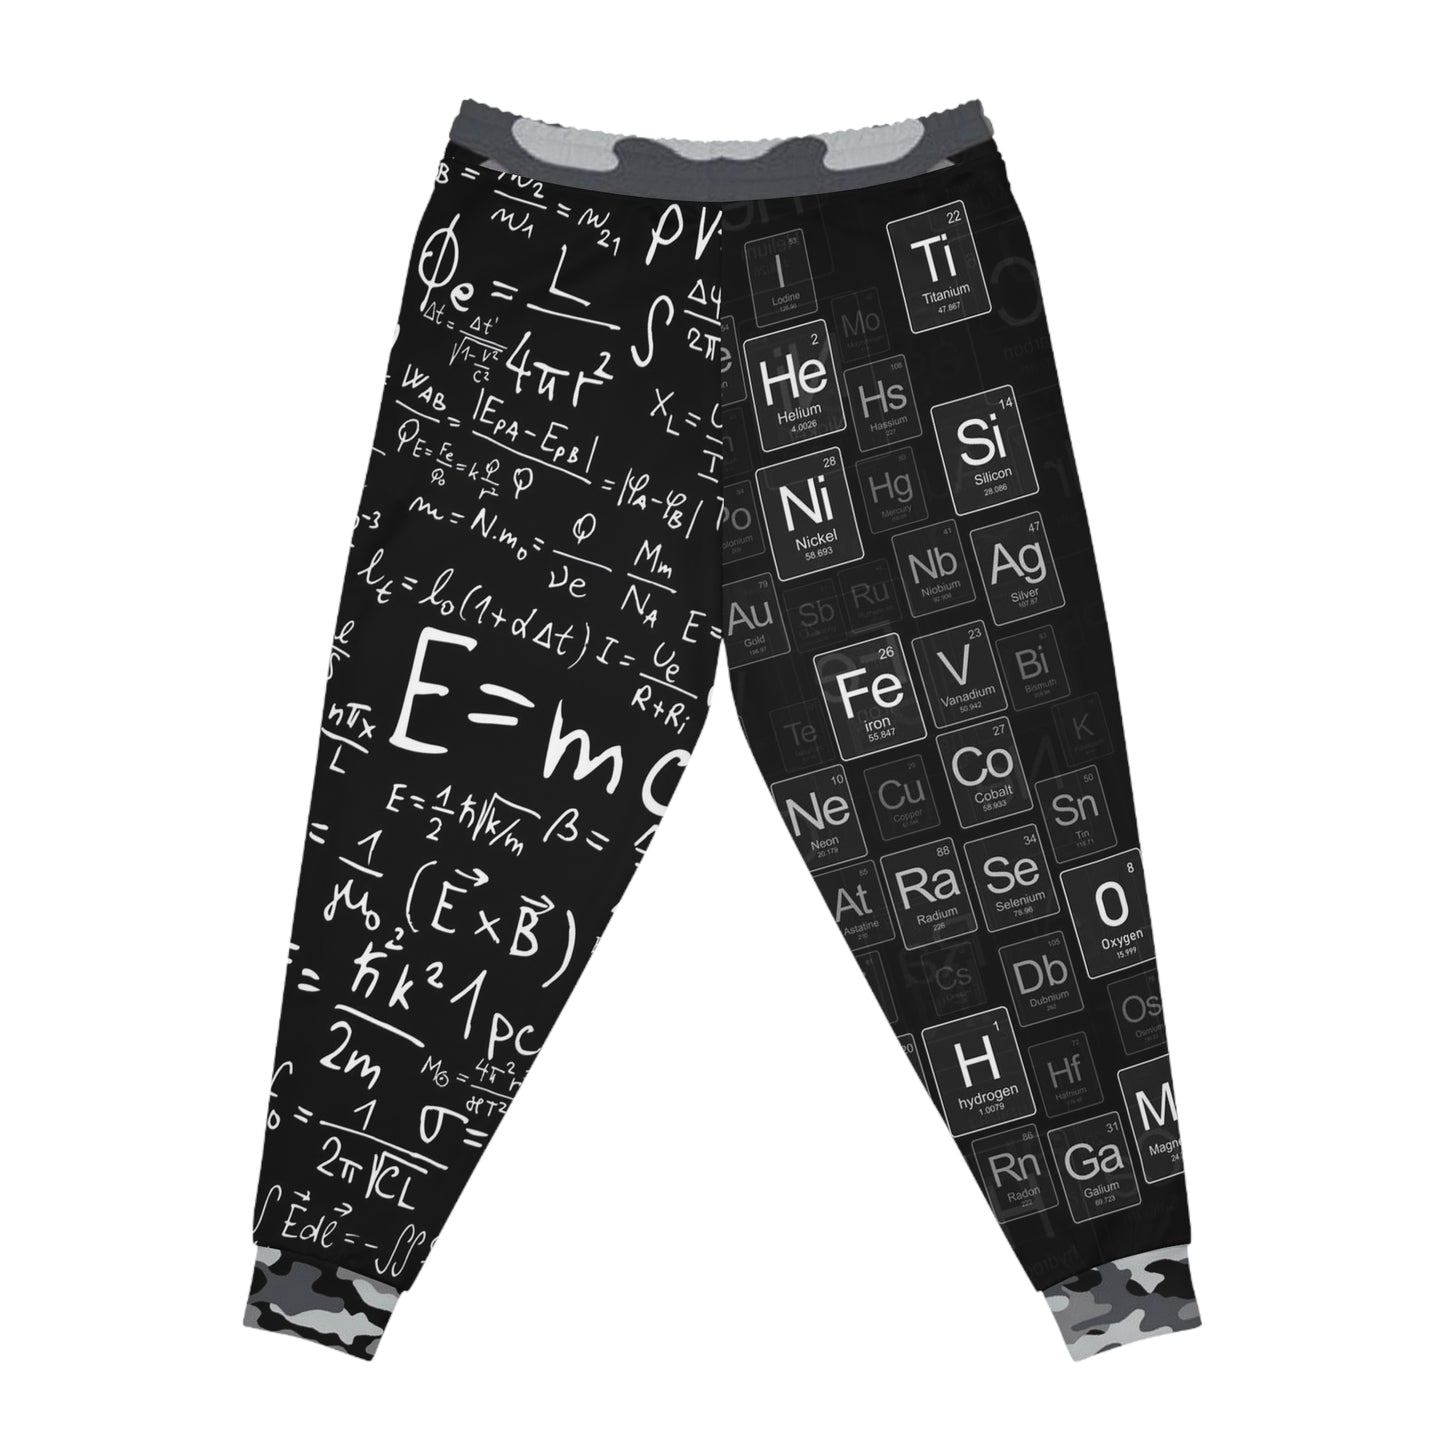 “Smart Guy” Athletic Joggers